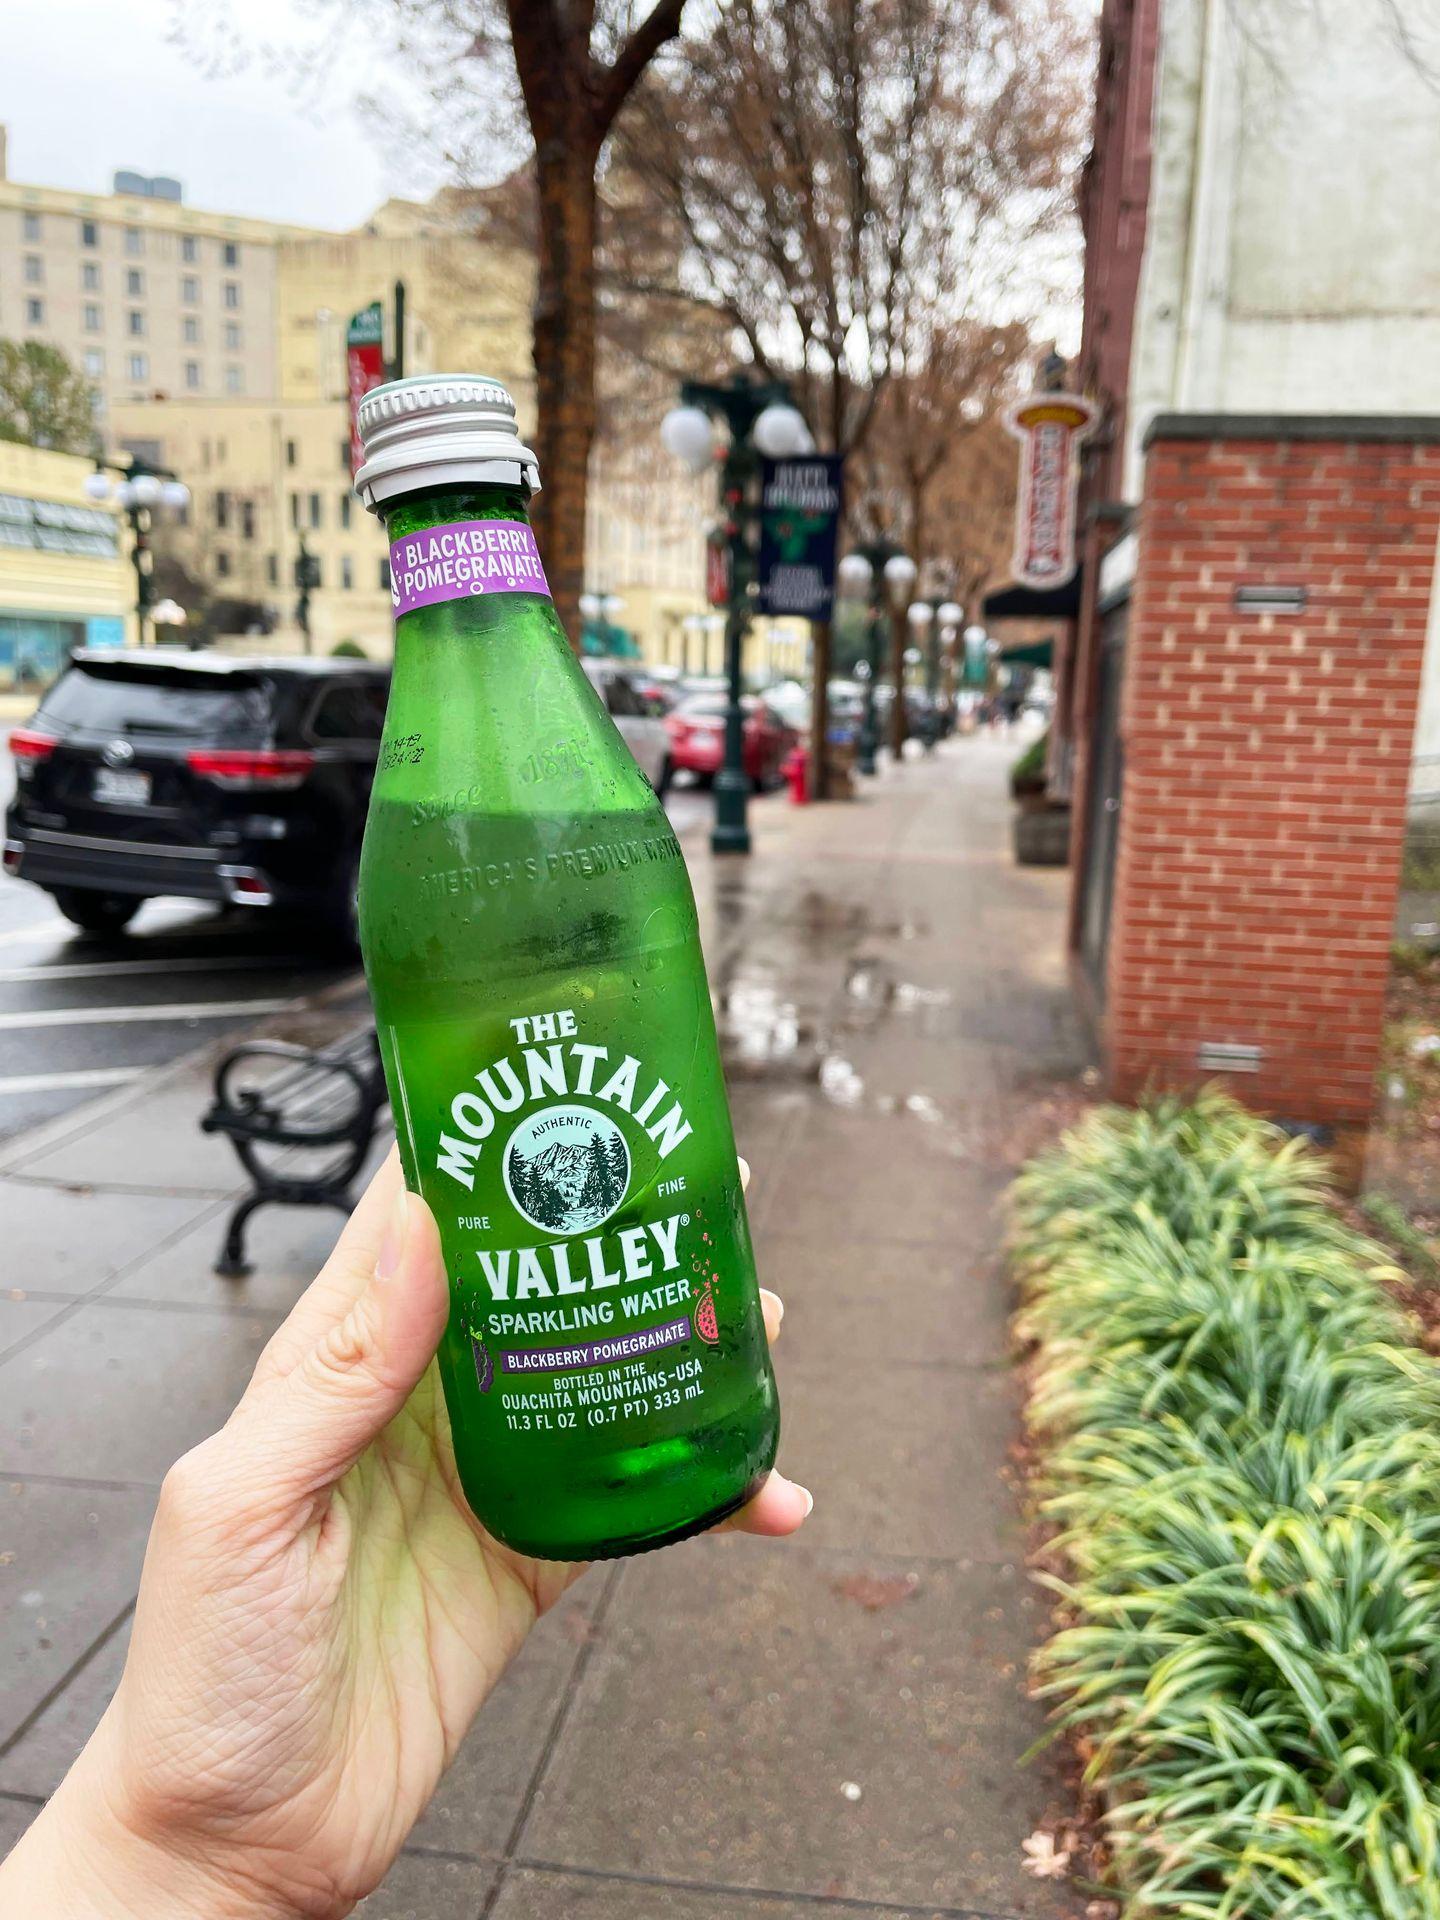 Holding up a bottle of 'Blackberry Pomegranate' Mountain Valley Water on the sidewalk.